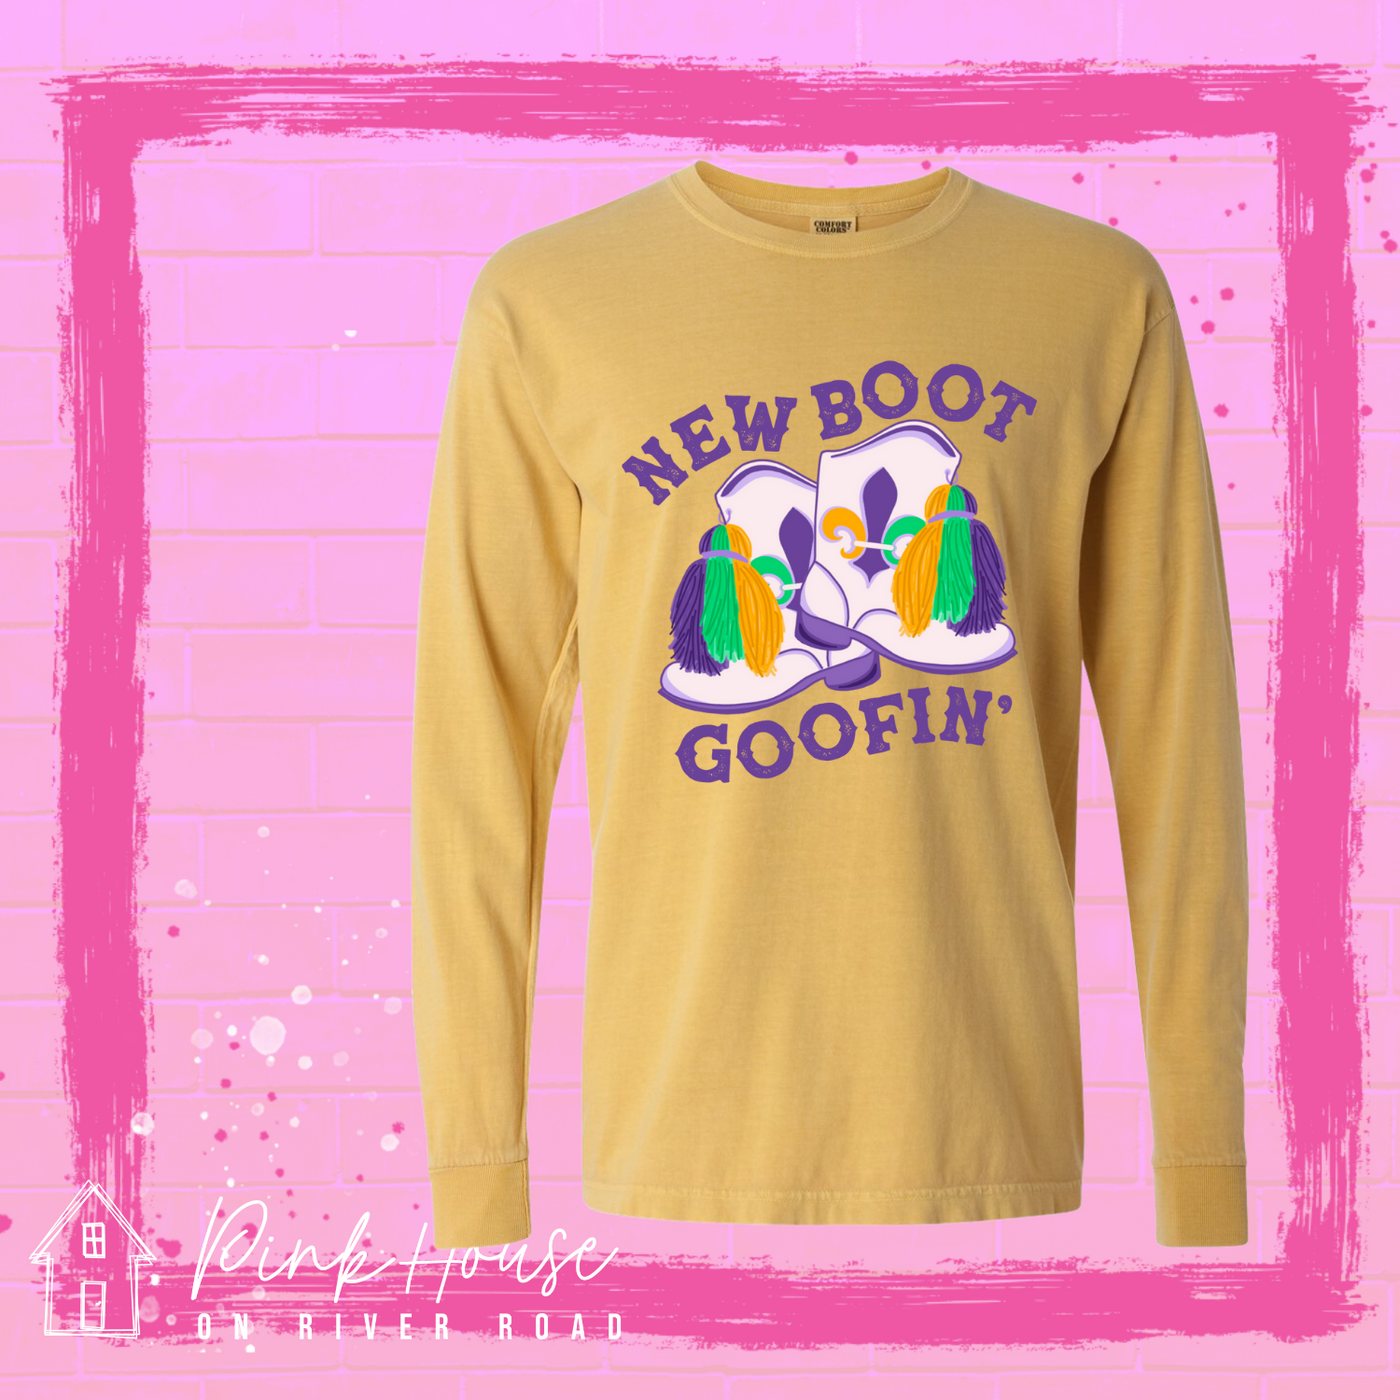 A Mustard long sleeve tee with a graphic. Graphic is of a pair of majorette boots, the boots have a tassel and fleur de lis both in gold, green and purple. the words New Boot are above the boots and the word goofin' is below thee boots the words are in purple.